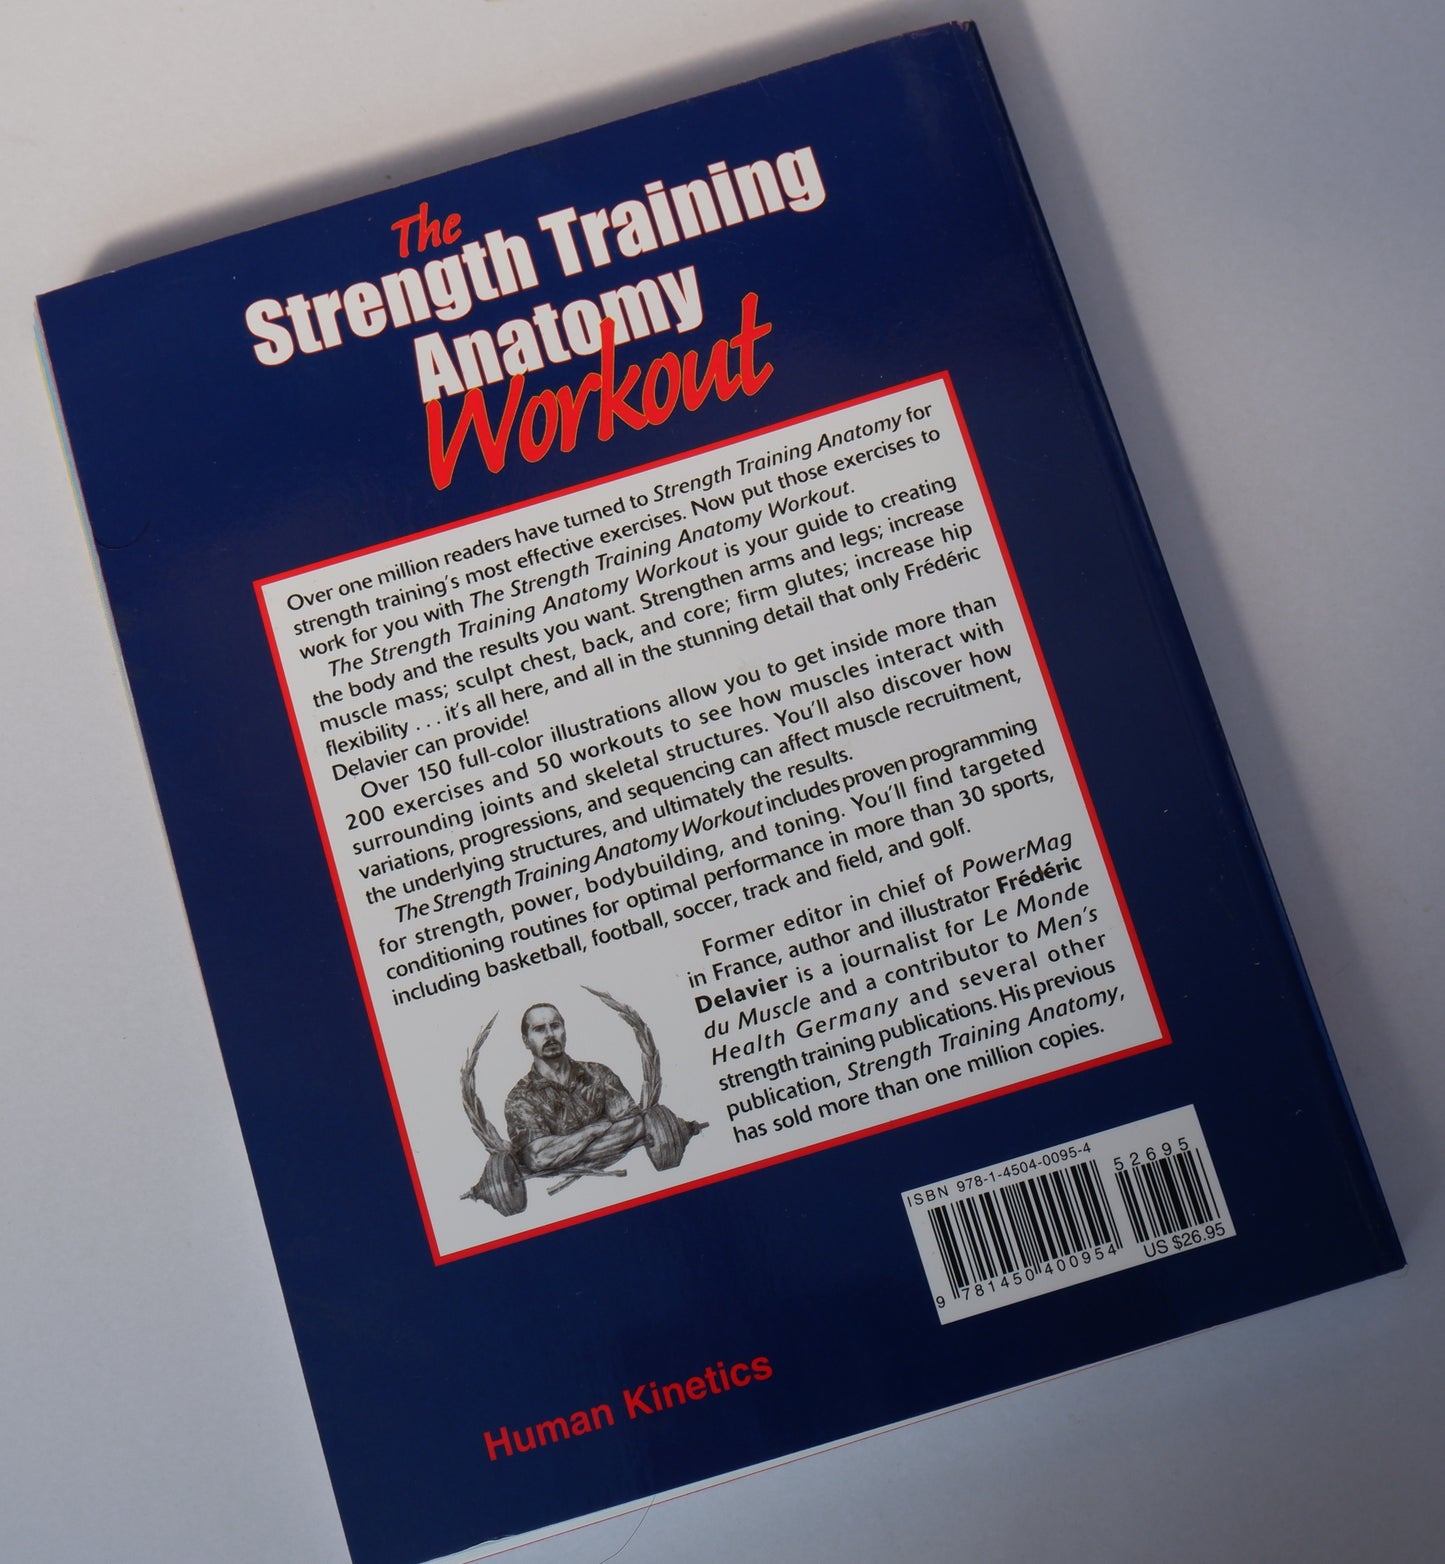 The Strength Training Anatomy Workout: by Frederic Delavier (Author), Michael Gundill (Author)